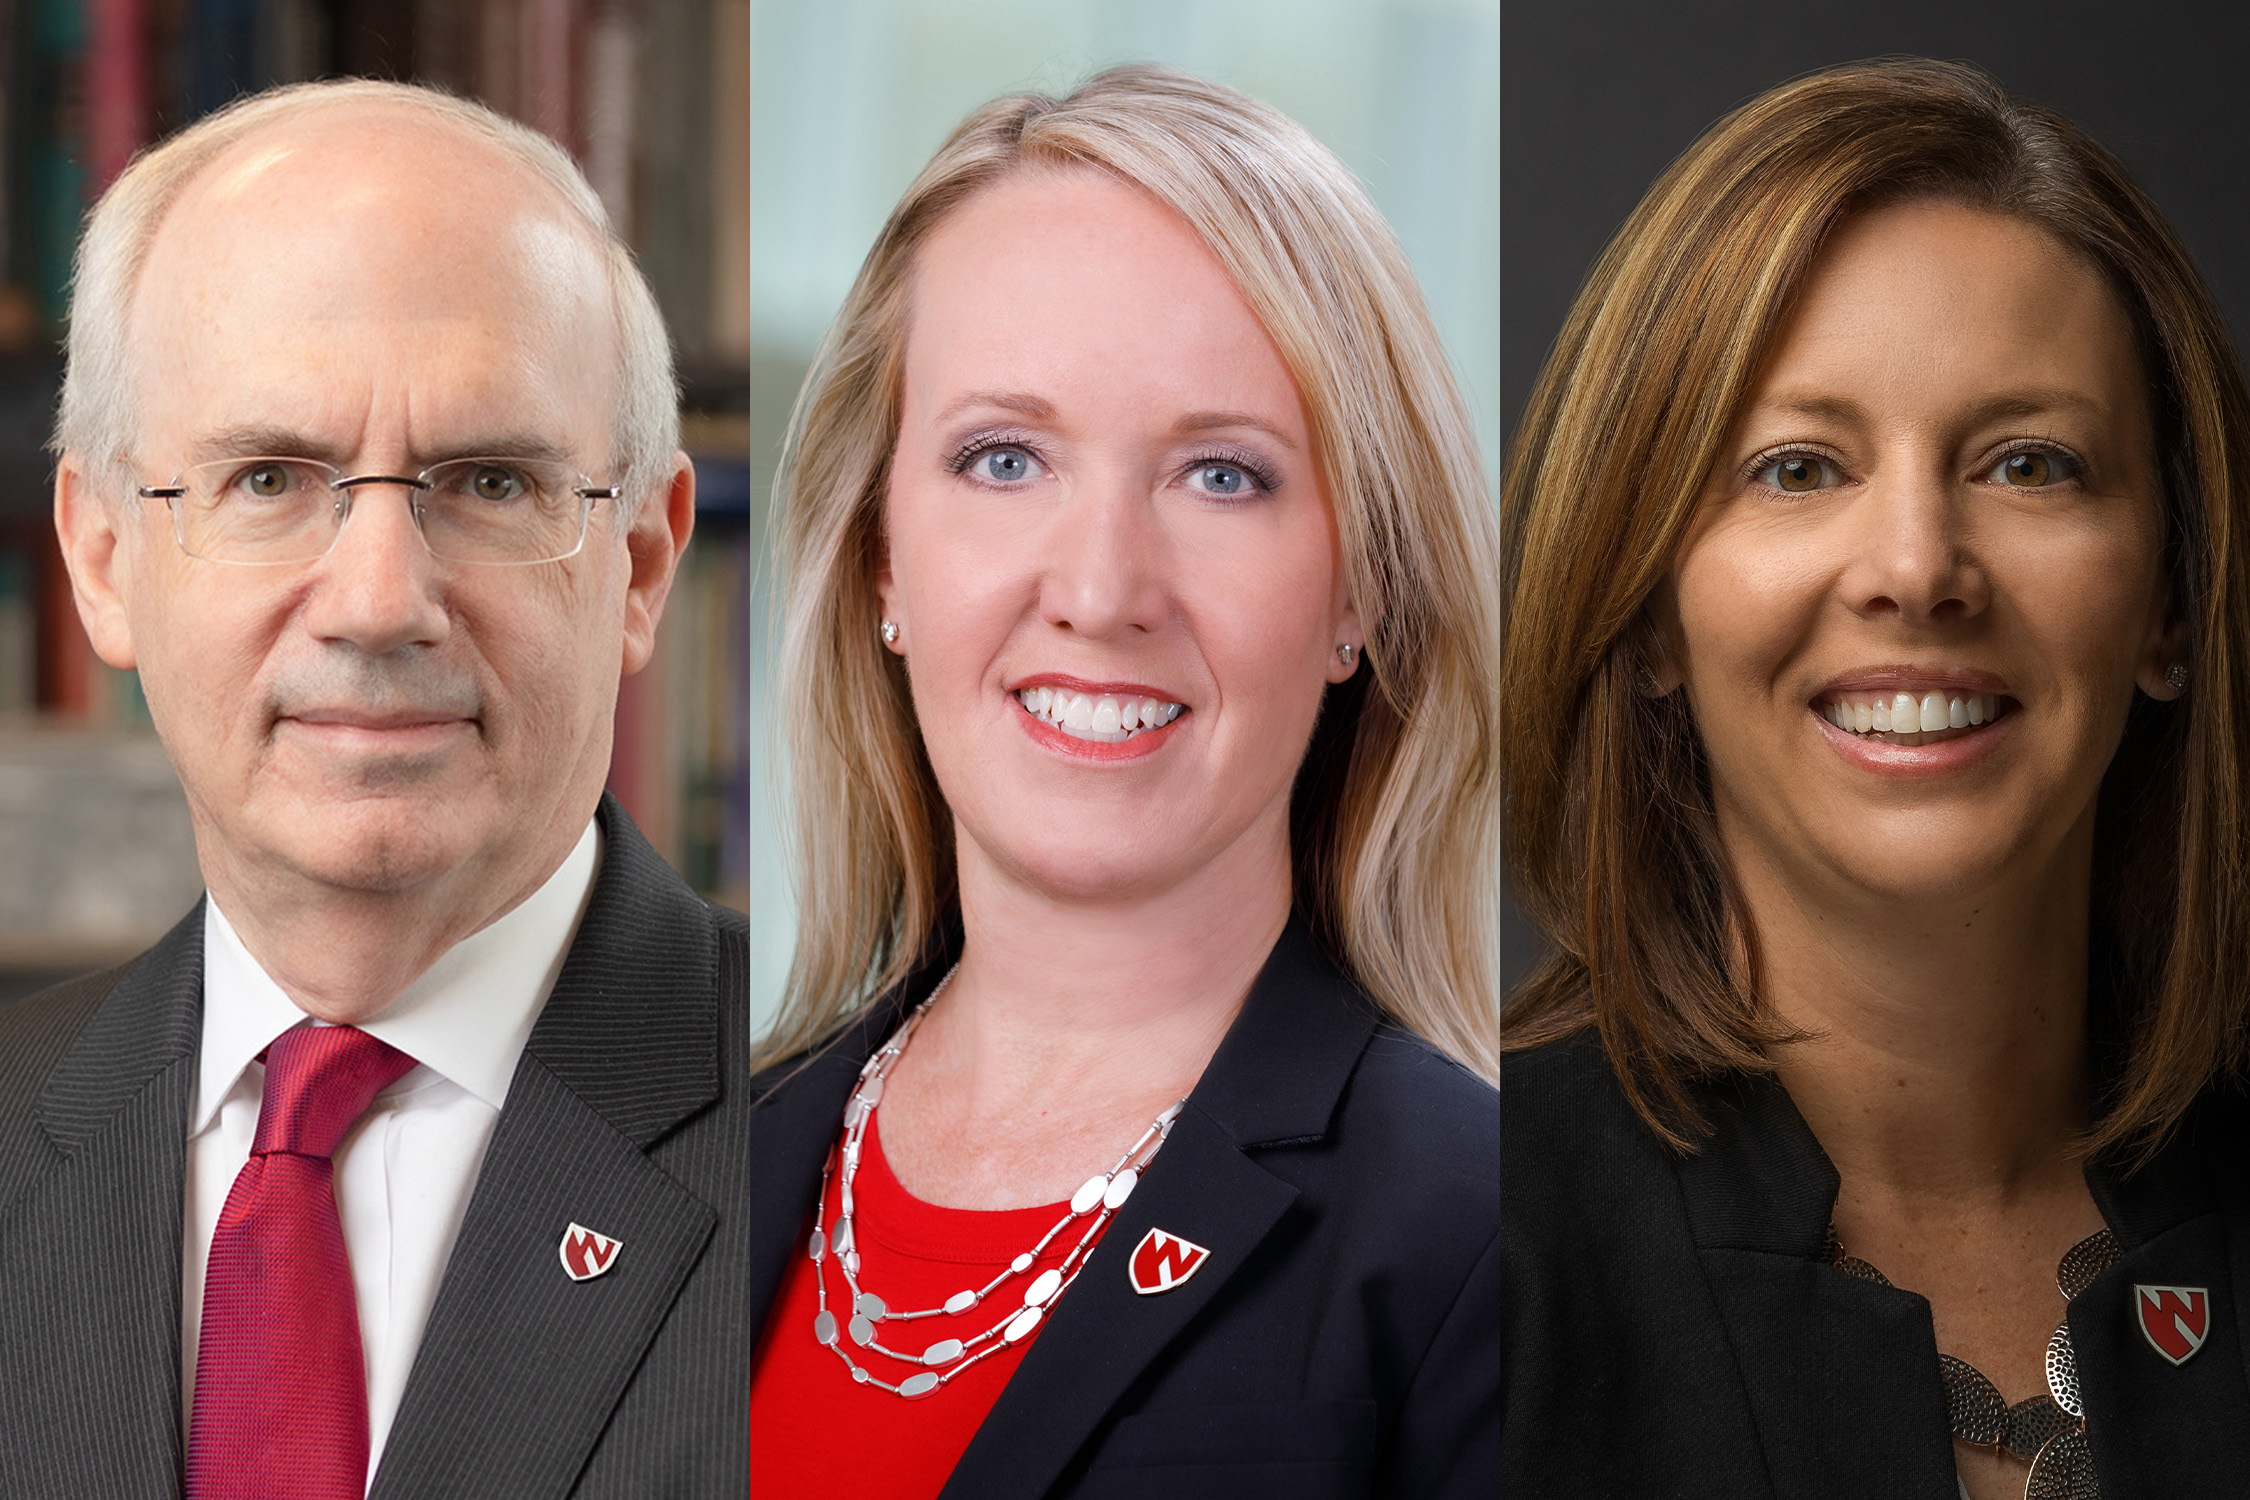 UNMC Chancellor Jeffrey P&period; Gold&comma; MD&comma; Anne Barnes&comma; vice chancellor for business&comma; finance and business development&comma; and Jennifer Bartholomew&comma; associate vice chancellor for UNMC and vice president for Nebraska Medicine facilities management and planning